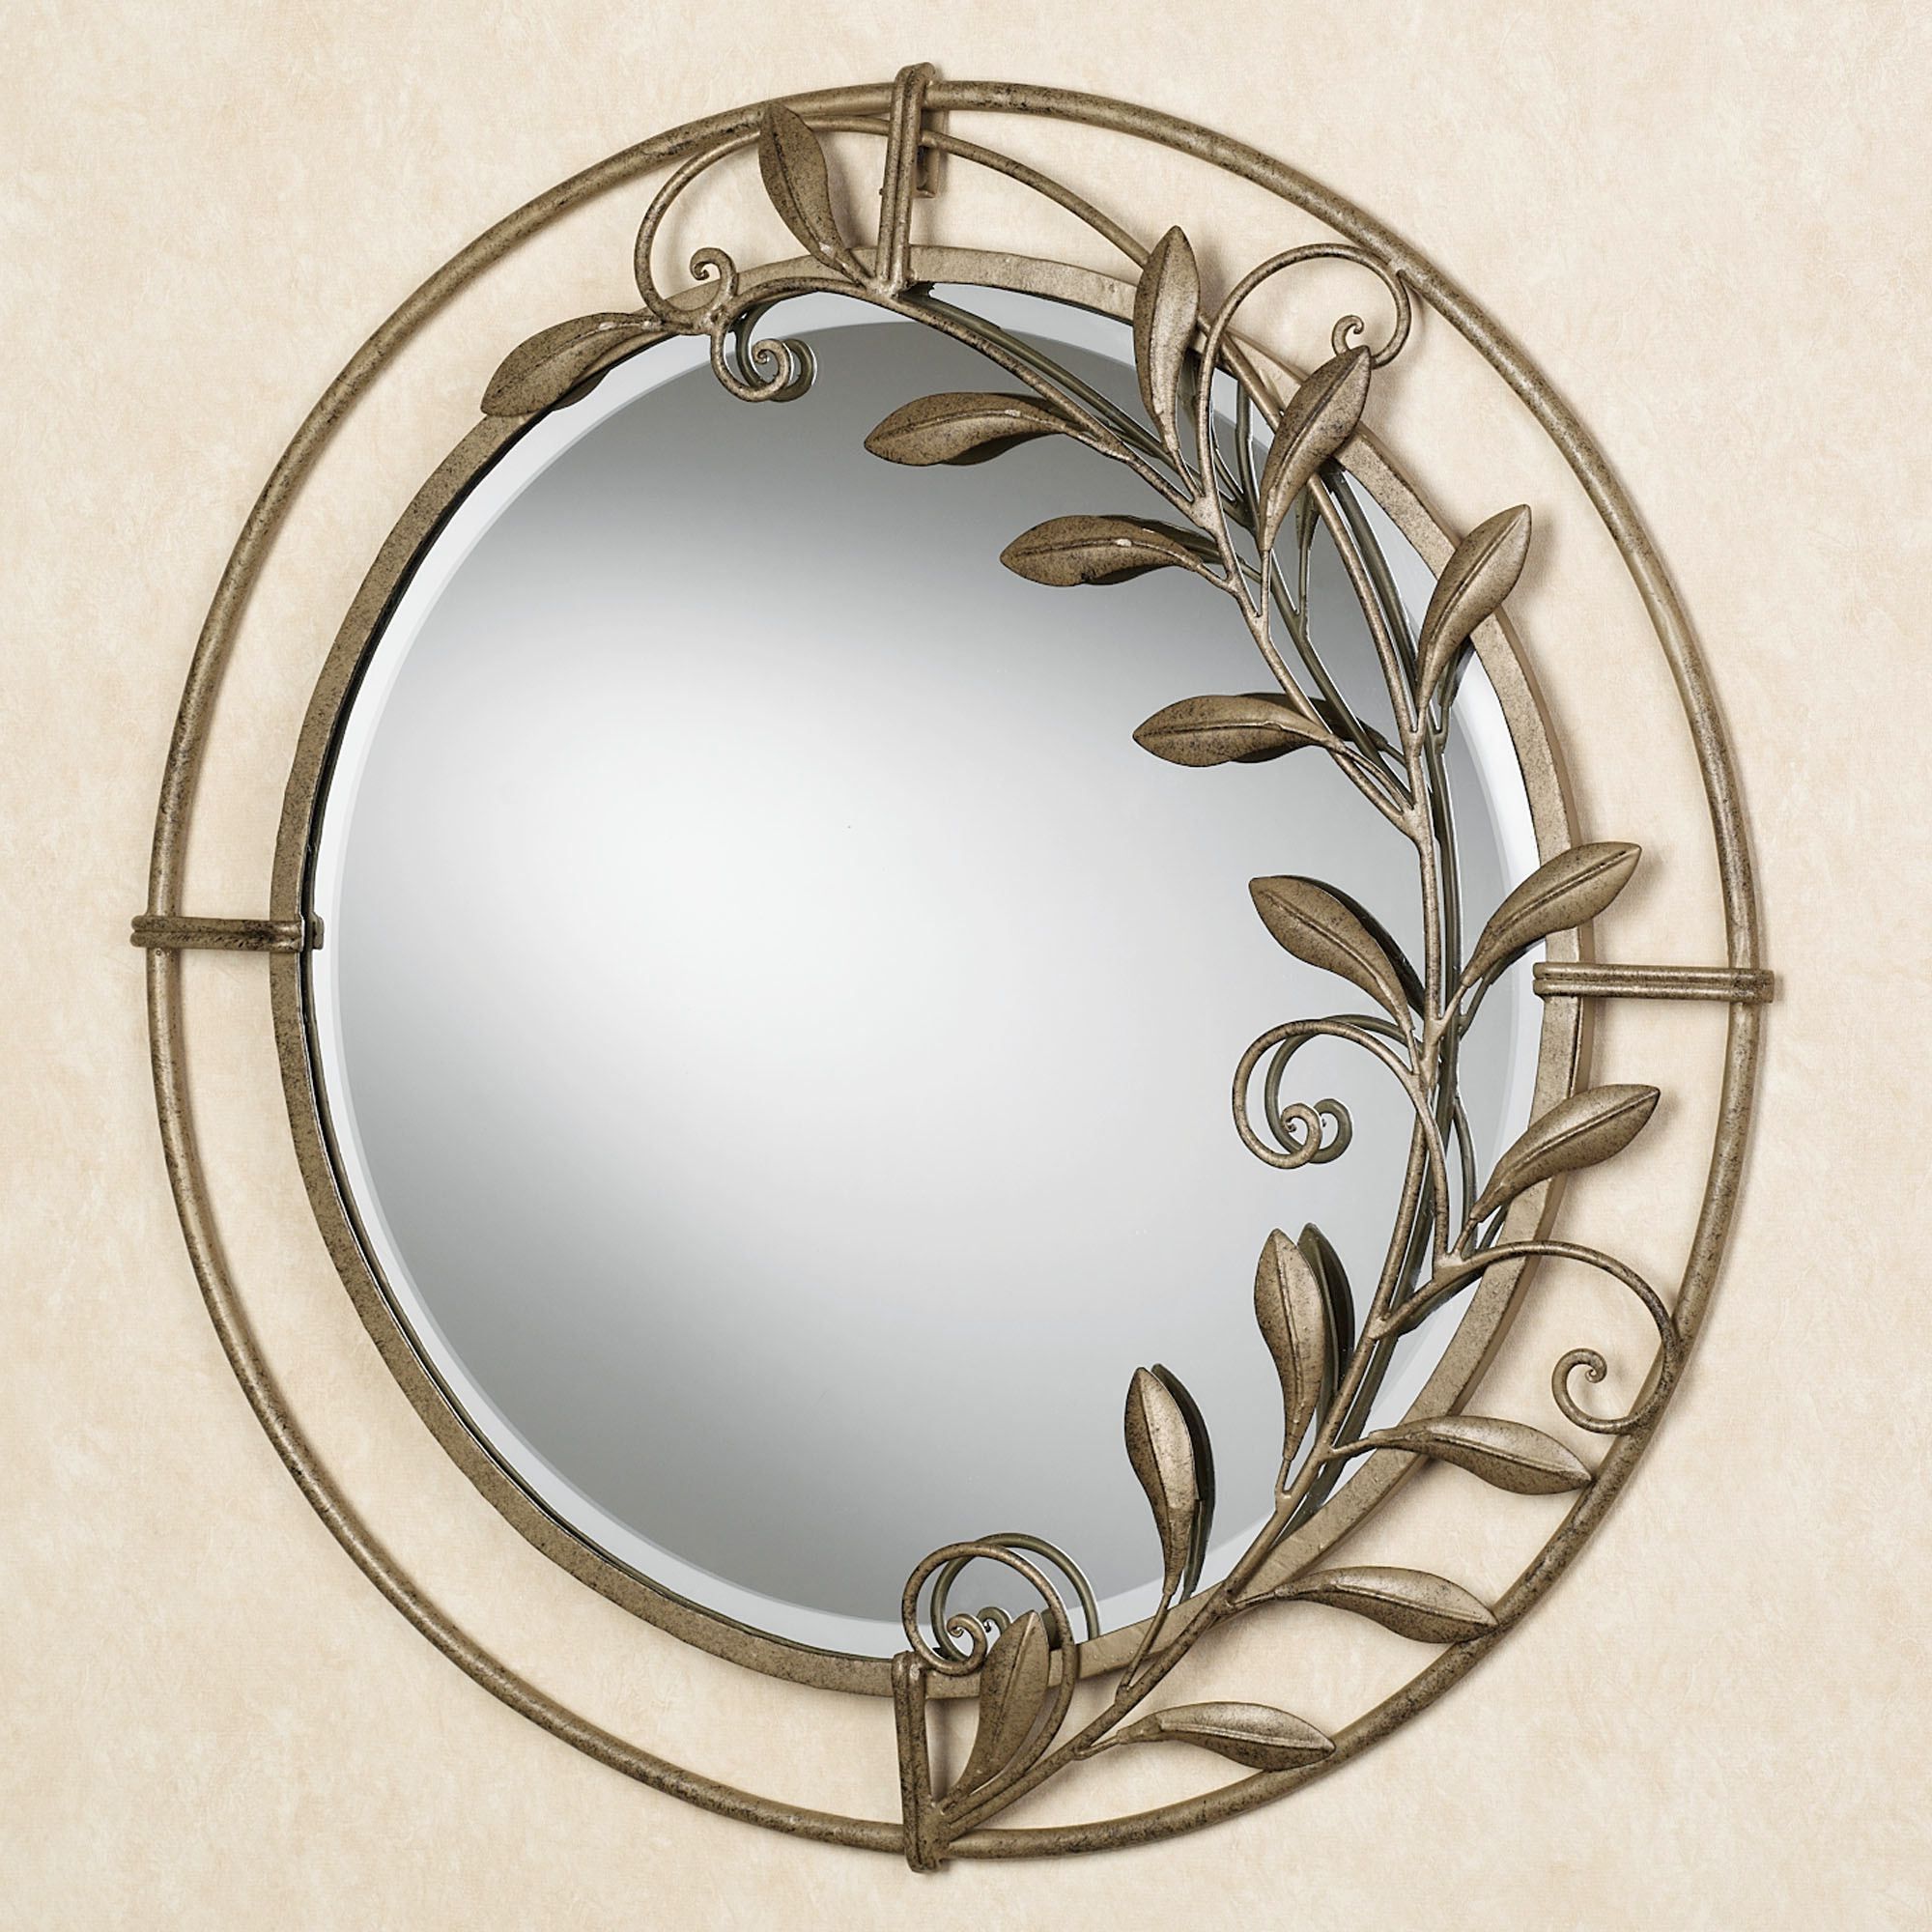 Antiqued Glass Wall Mirrors With Regard To Famous Galeazzo Antique Gold Round Metal Wall Mirror (View 11 of 15)